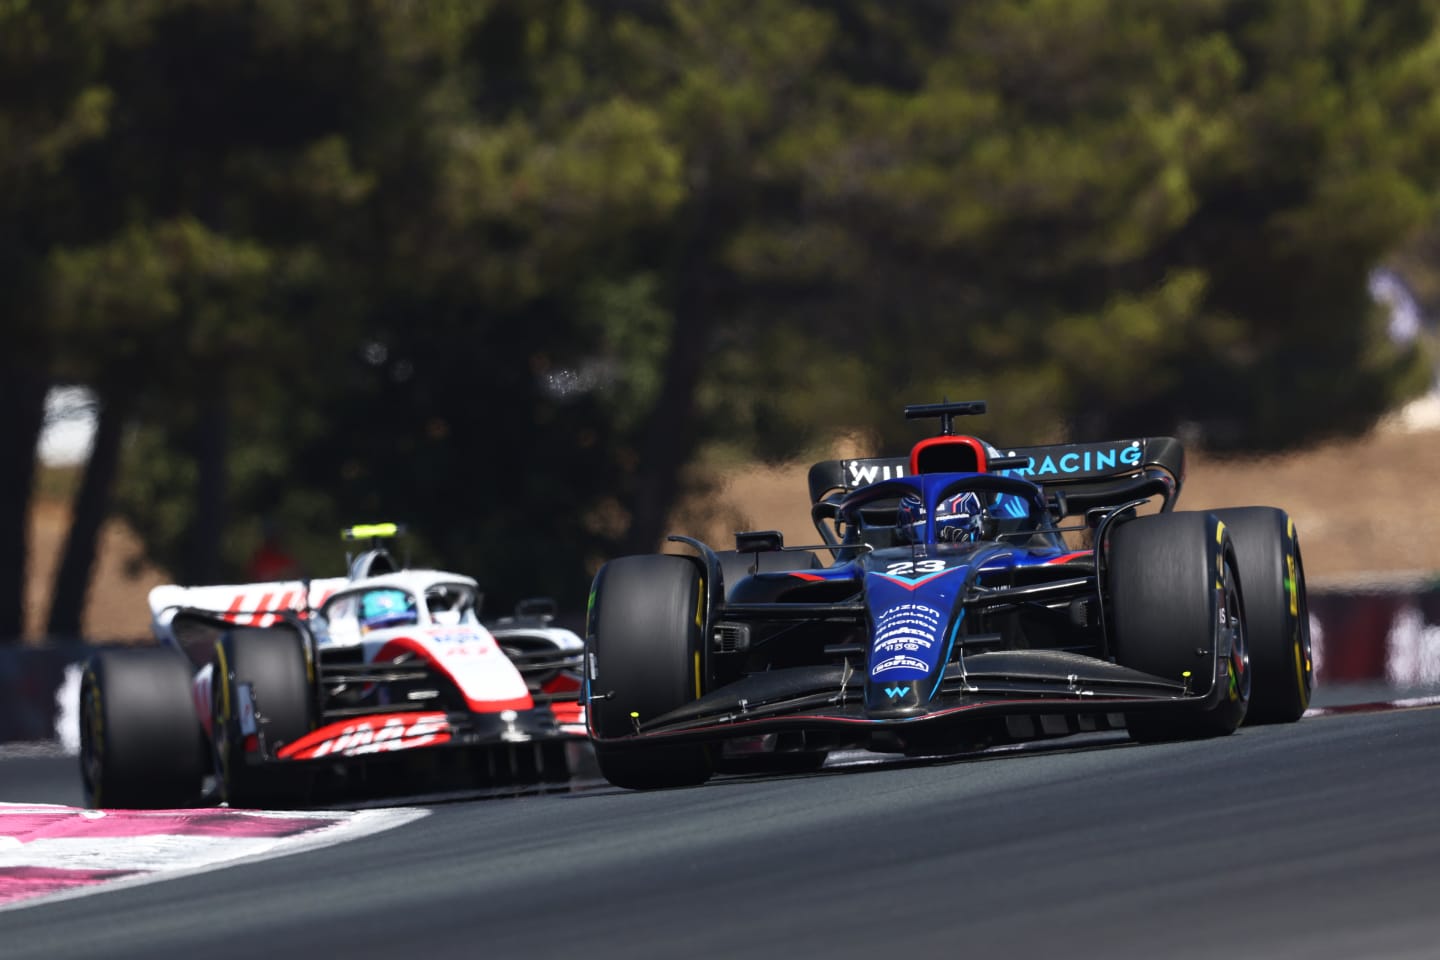 LE CASTELLET, FRANCE - JULY 24: Alexander Albon of Thailand driving the (23) Williams FW44 Mercedes leads Mick Schumacher of Germany driving the (47) Haas F1 VF-22 Ferrari during the F1 Grand Prix of France at Circuit Paul Ricard on July 24, 2022 in Le Castellet, France. (Photo by Clive Rose/Getty Images)